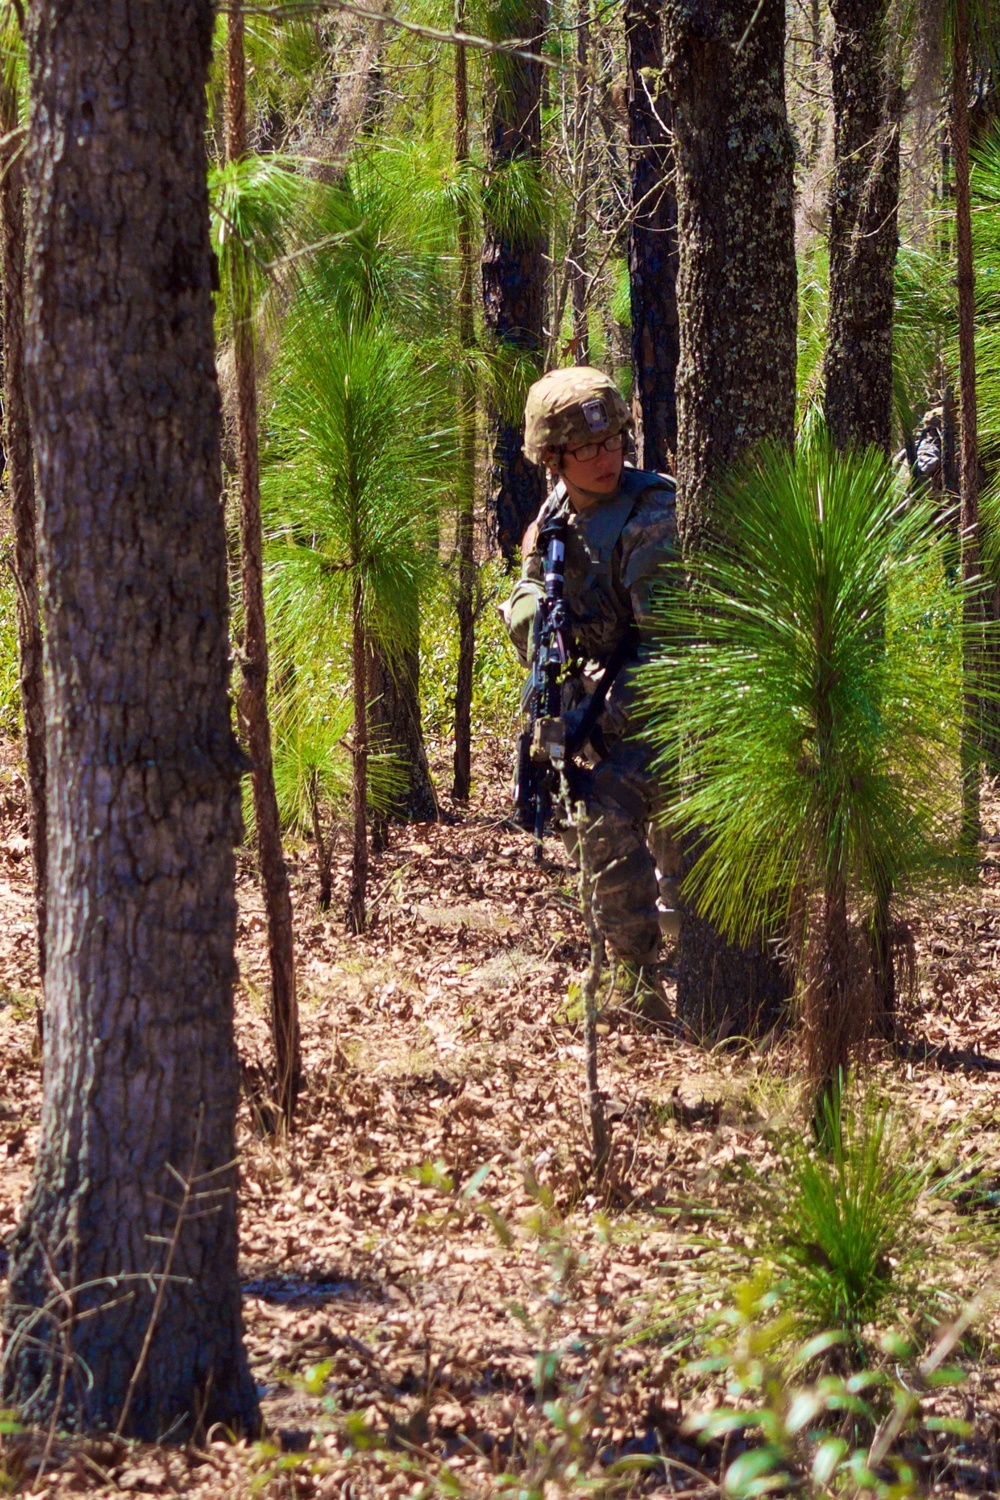 Soldiers from 1st Battalion, 124th Infantry Regiment and Troop A, 1st Squadron, 153d Cavalry Regiment converged to conduct three weeks of pre-mobilization training from February 19, 2016 to March 11, 20116 at Camp Blanding Joint Training Center, Fla.